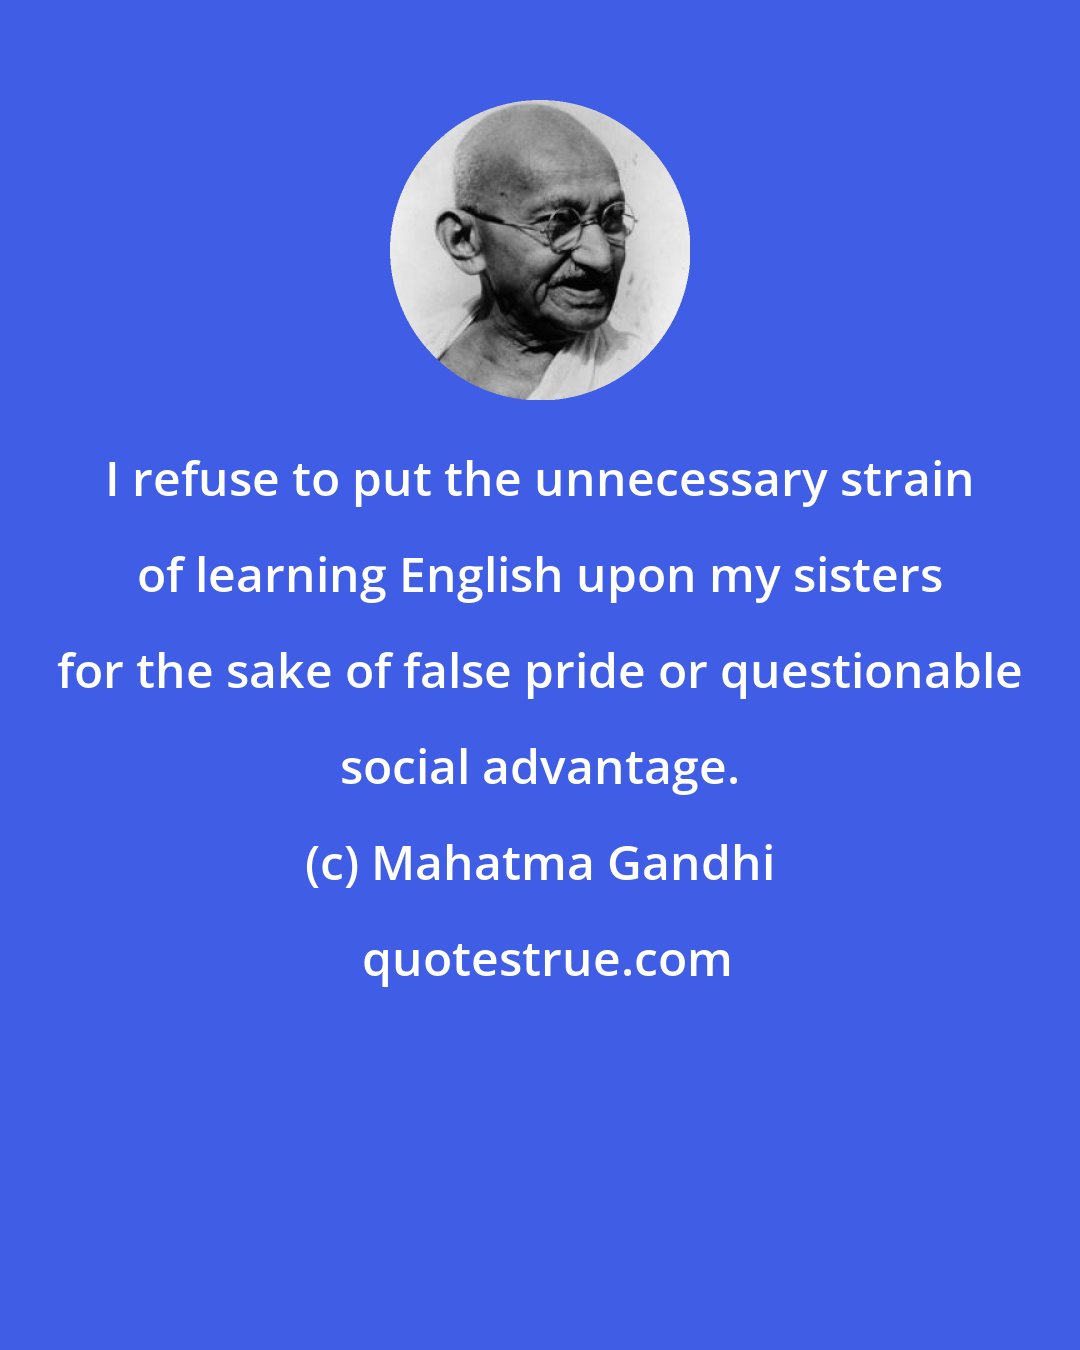 Mahatma Gandhi: I refuse to put the unnecessary strain of learning English upon my sisters for the sake of false pride or questionable social advantage.